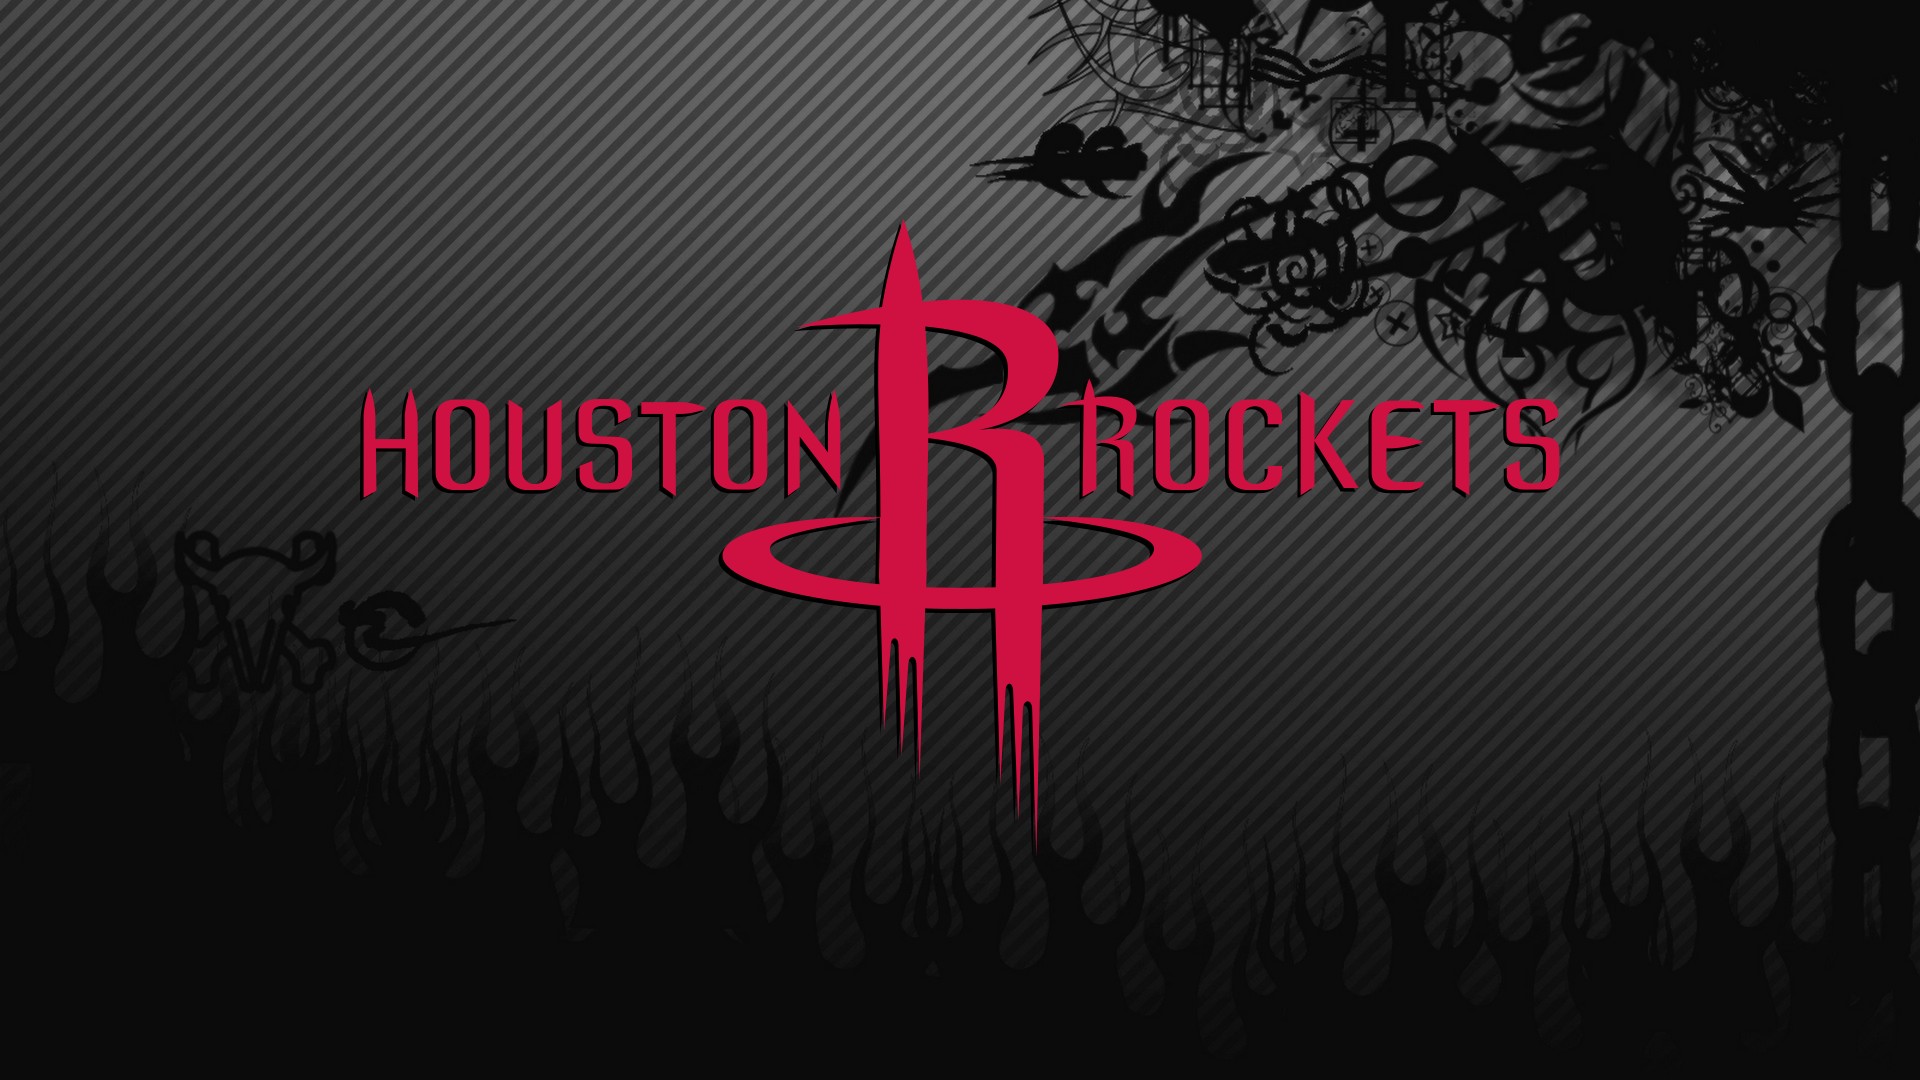 Windows Wallpaper Houston Basketball with image dimensions 1920x1080 pixel. You can make this wallpaper for your Desktop Computer Backgrounds, Windows or Mac Screensavers, iPhone Lock screen, Tablet or Android and another Mobile Phone device